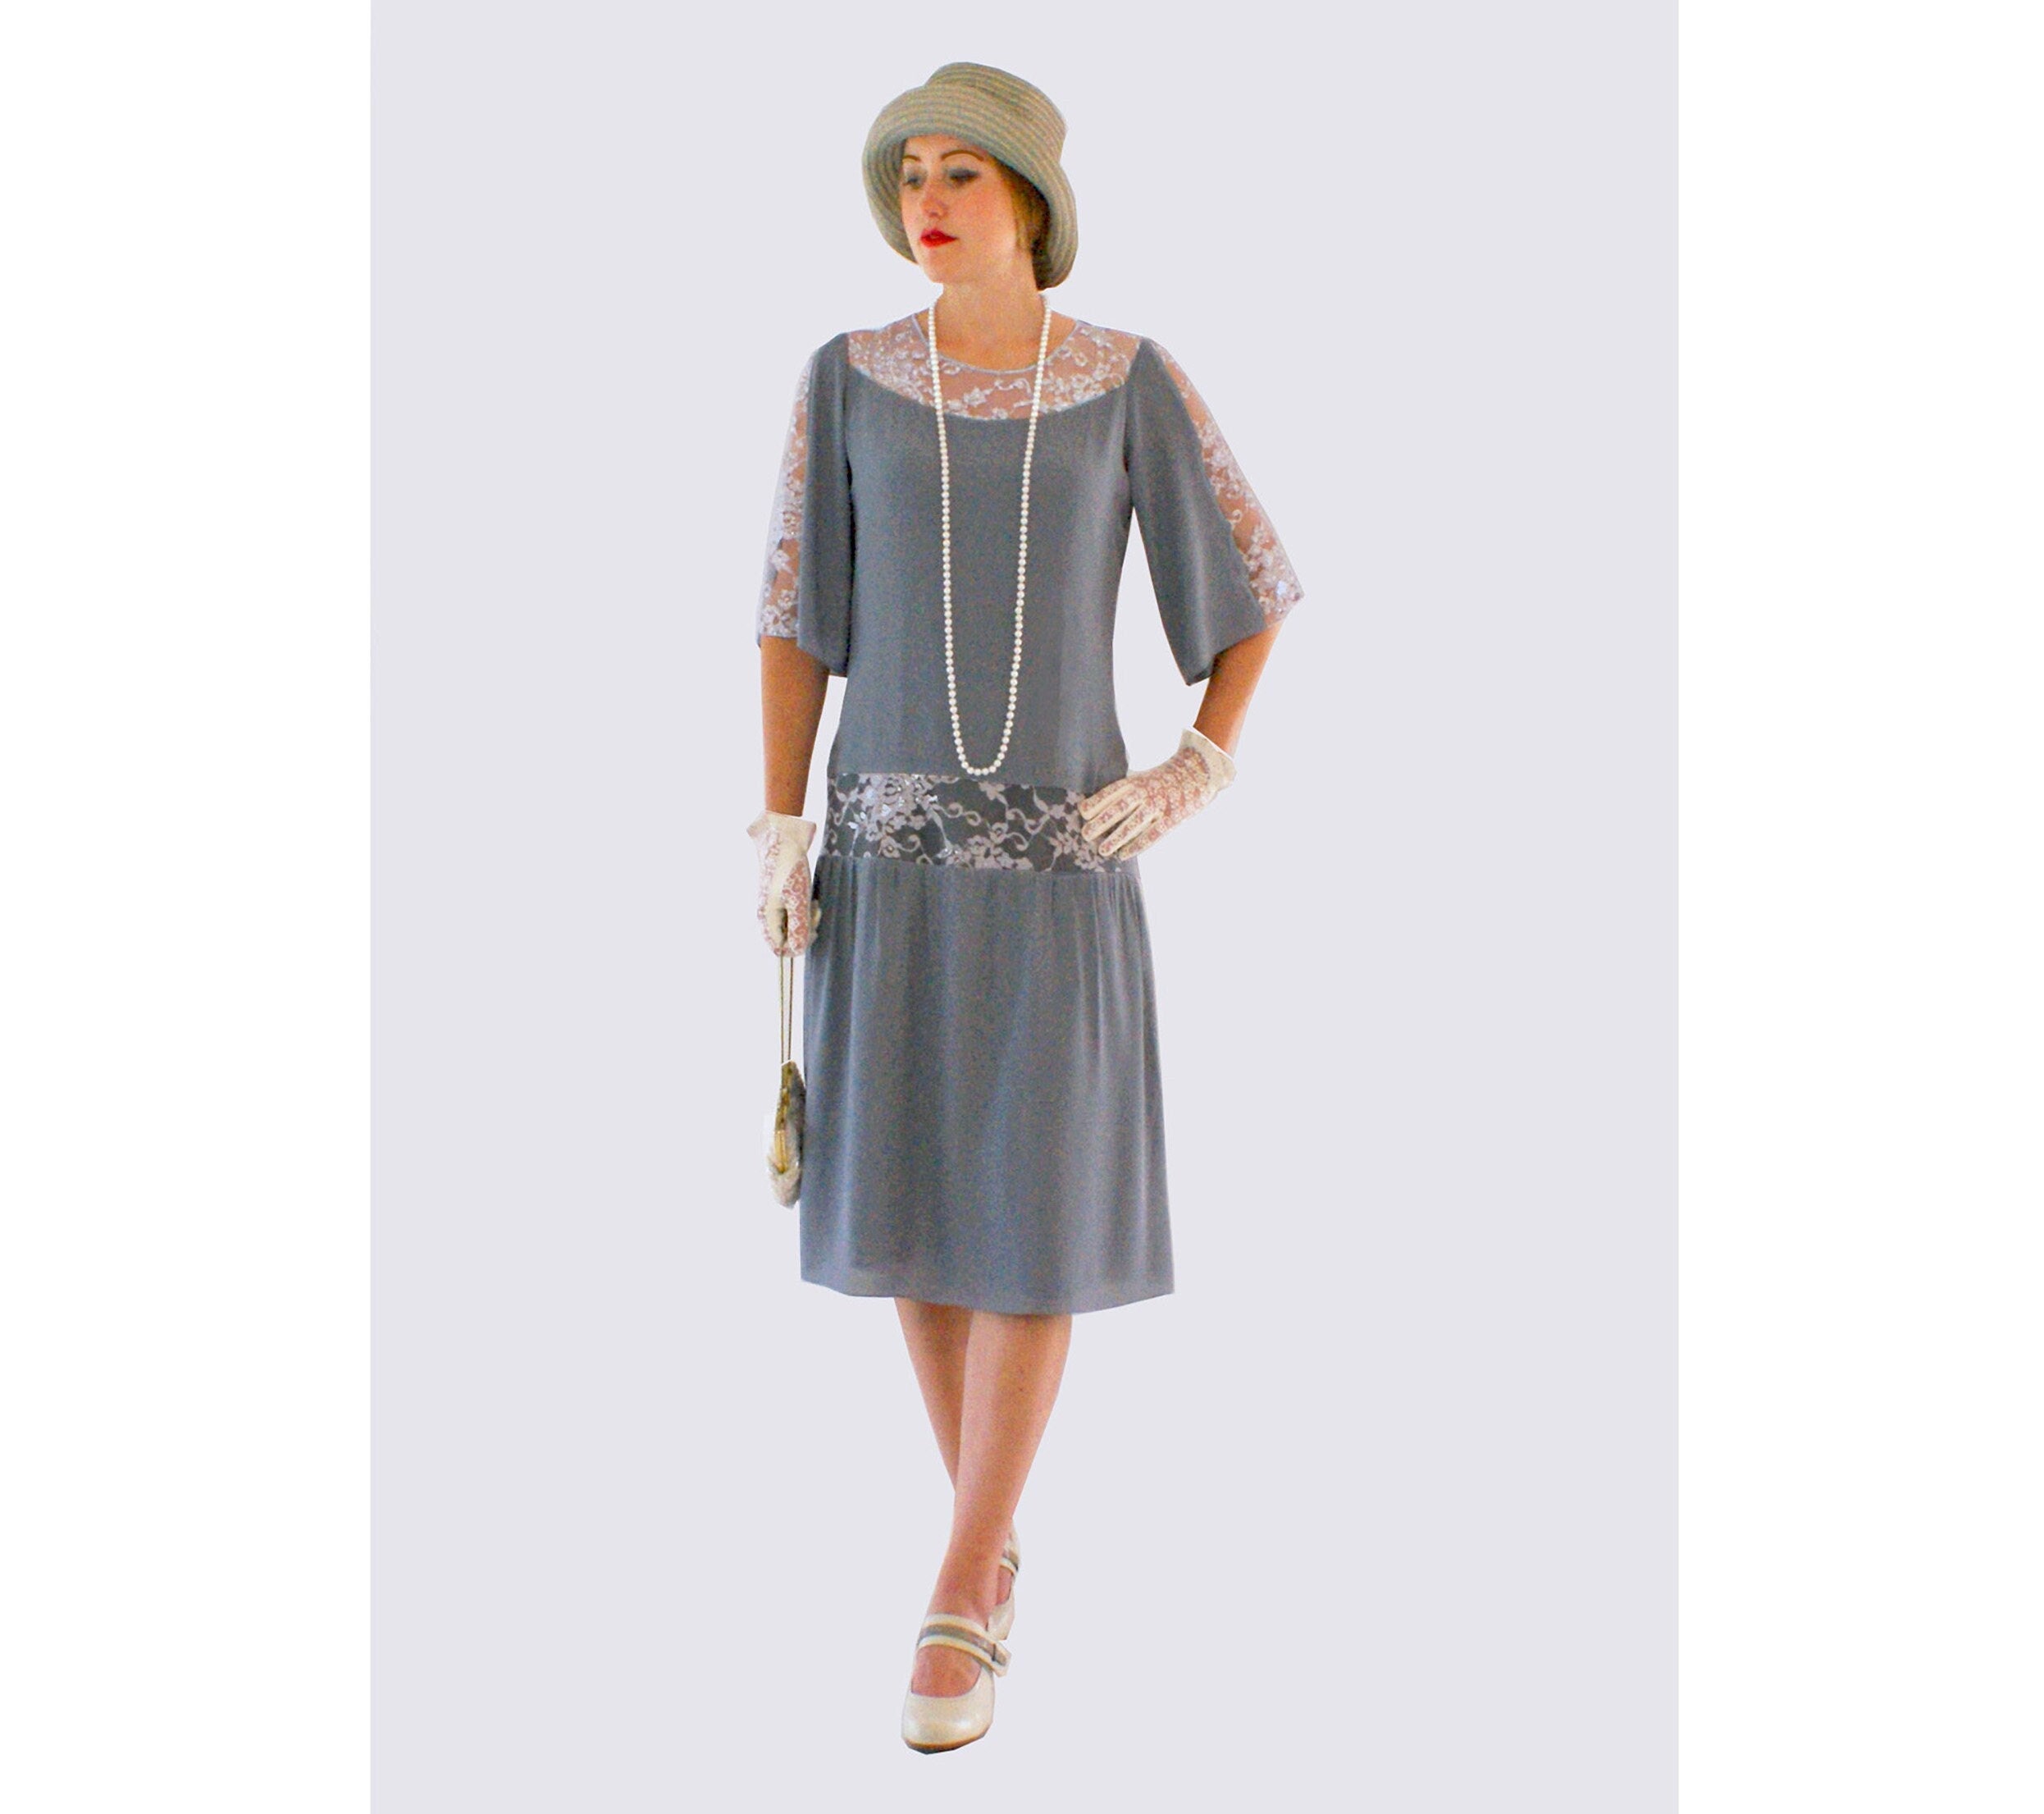 Grey Great Gatsby Dress With Elbow-length Sleeves 1920s